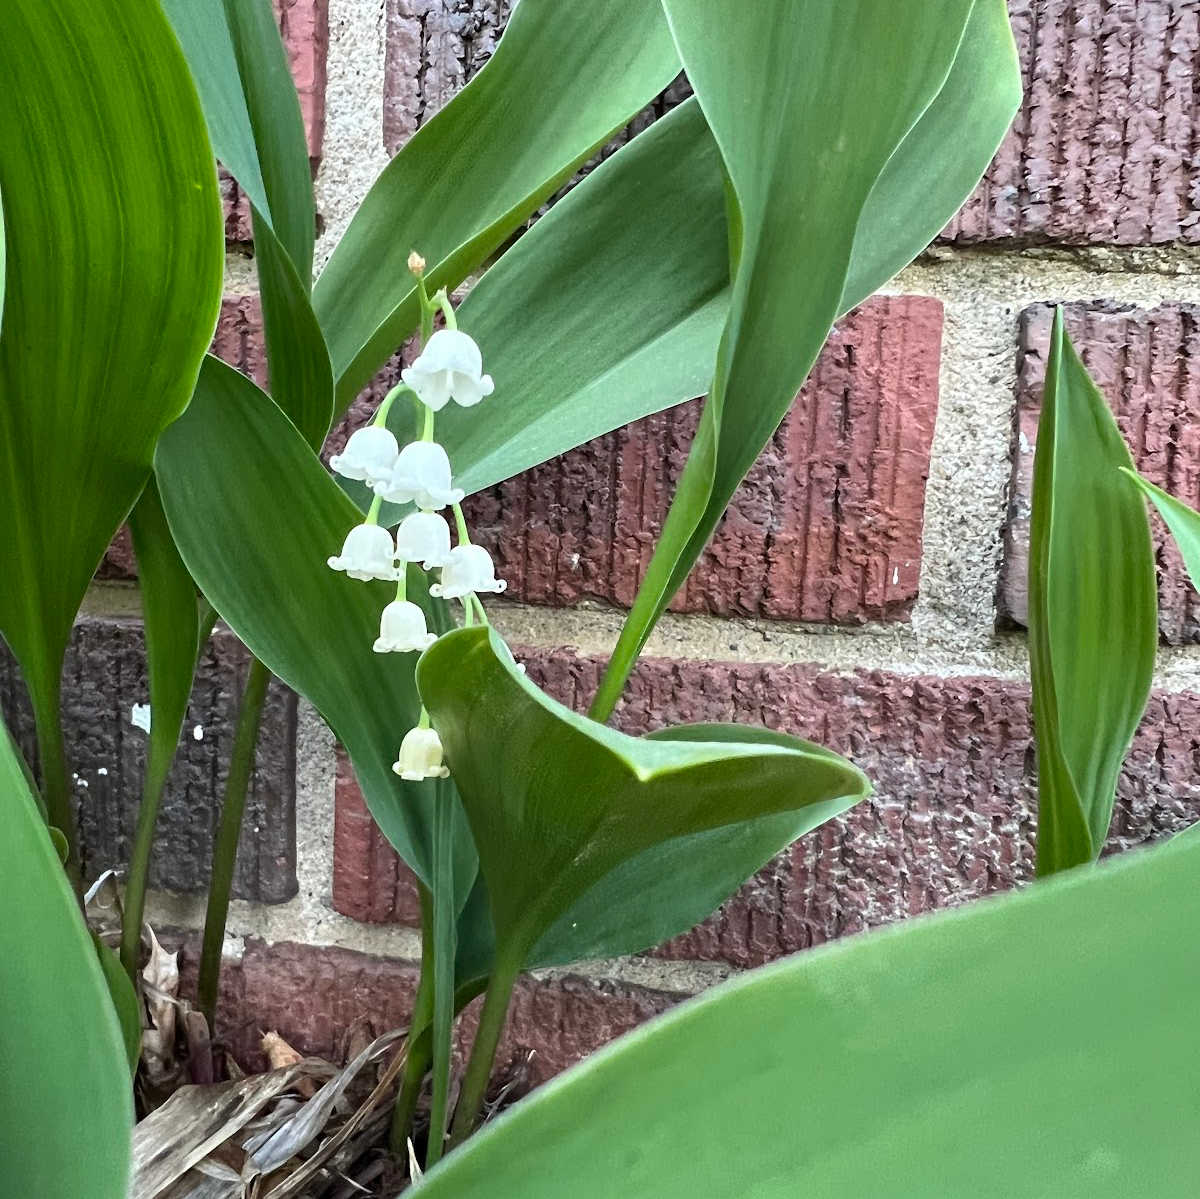 This lily of the valley has pretty white bell shaped flowers.